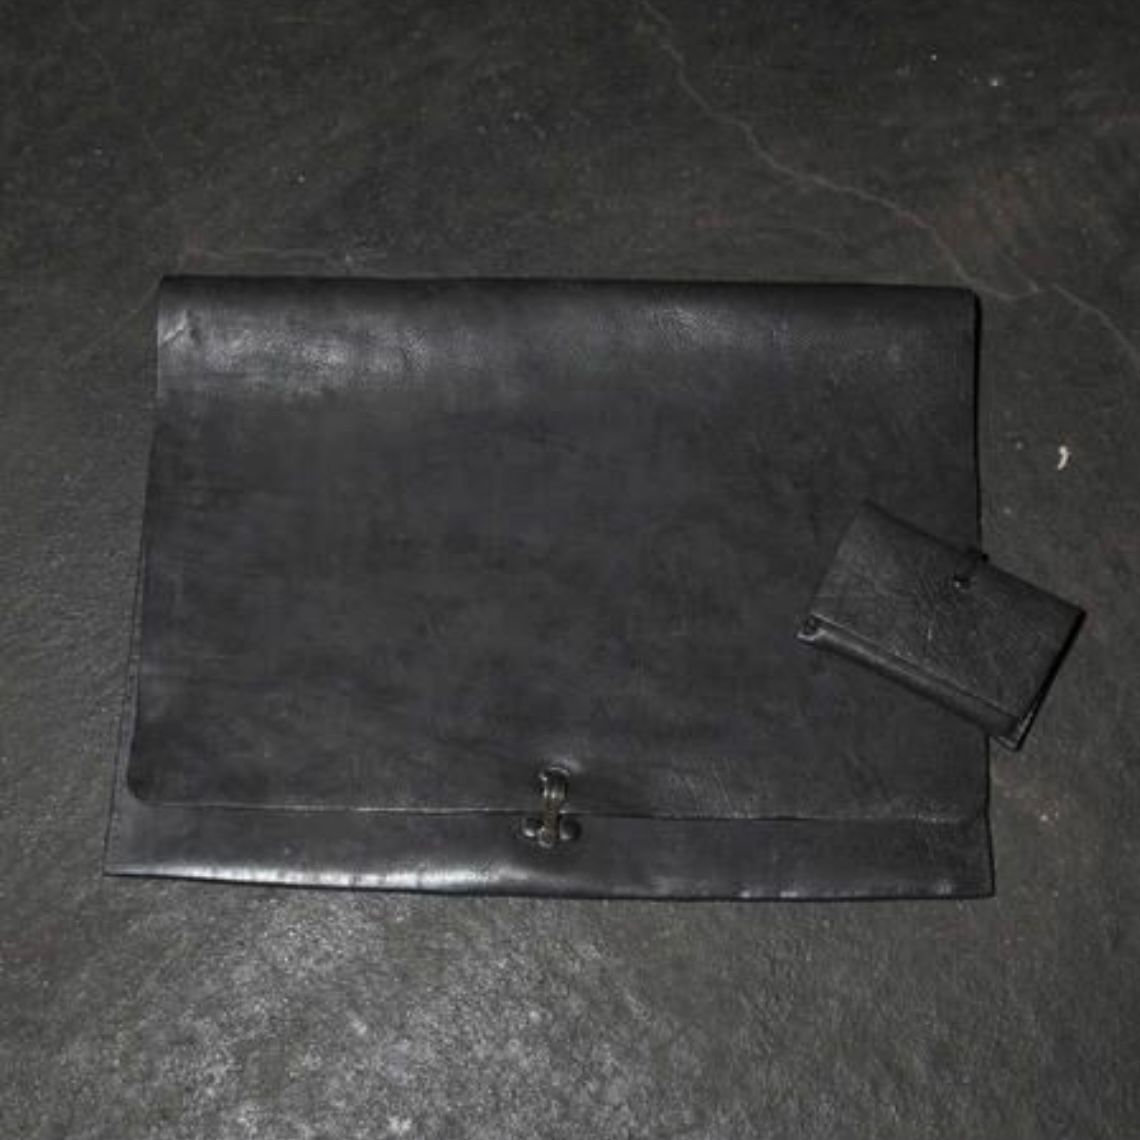 T.A.S - 【お取り寄せ注文可能】Leather Clip Board | ACRMTSM ONLINE